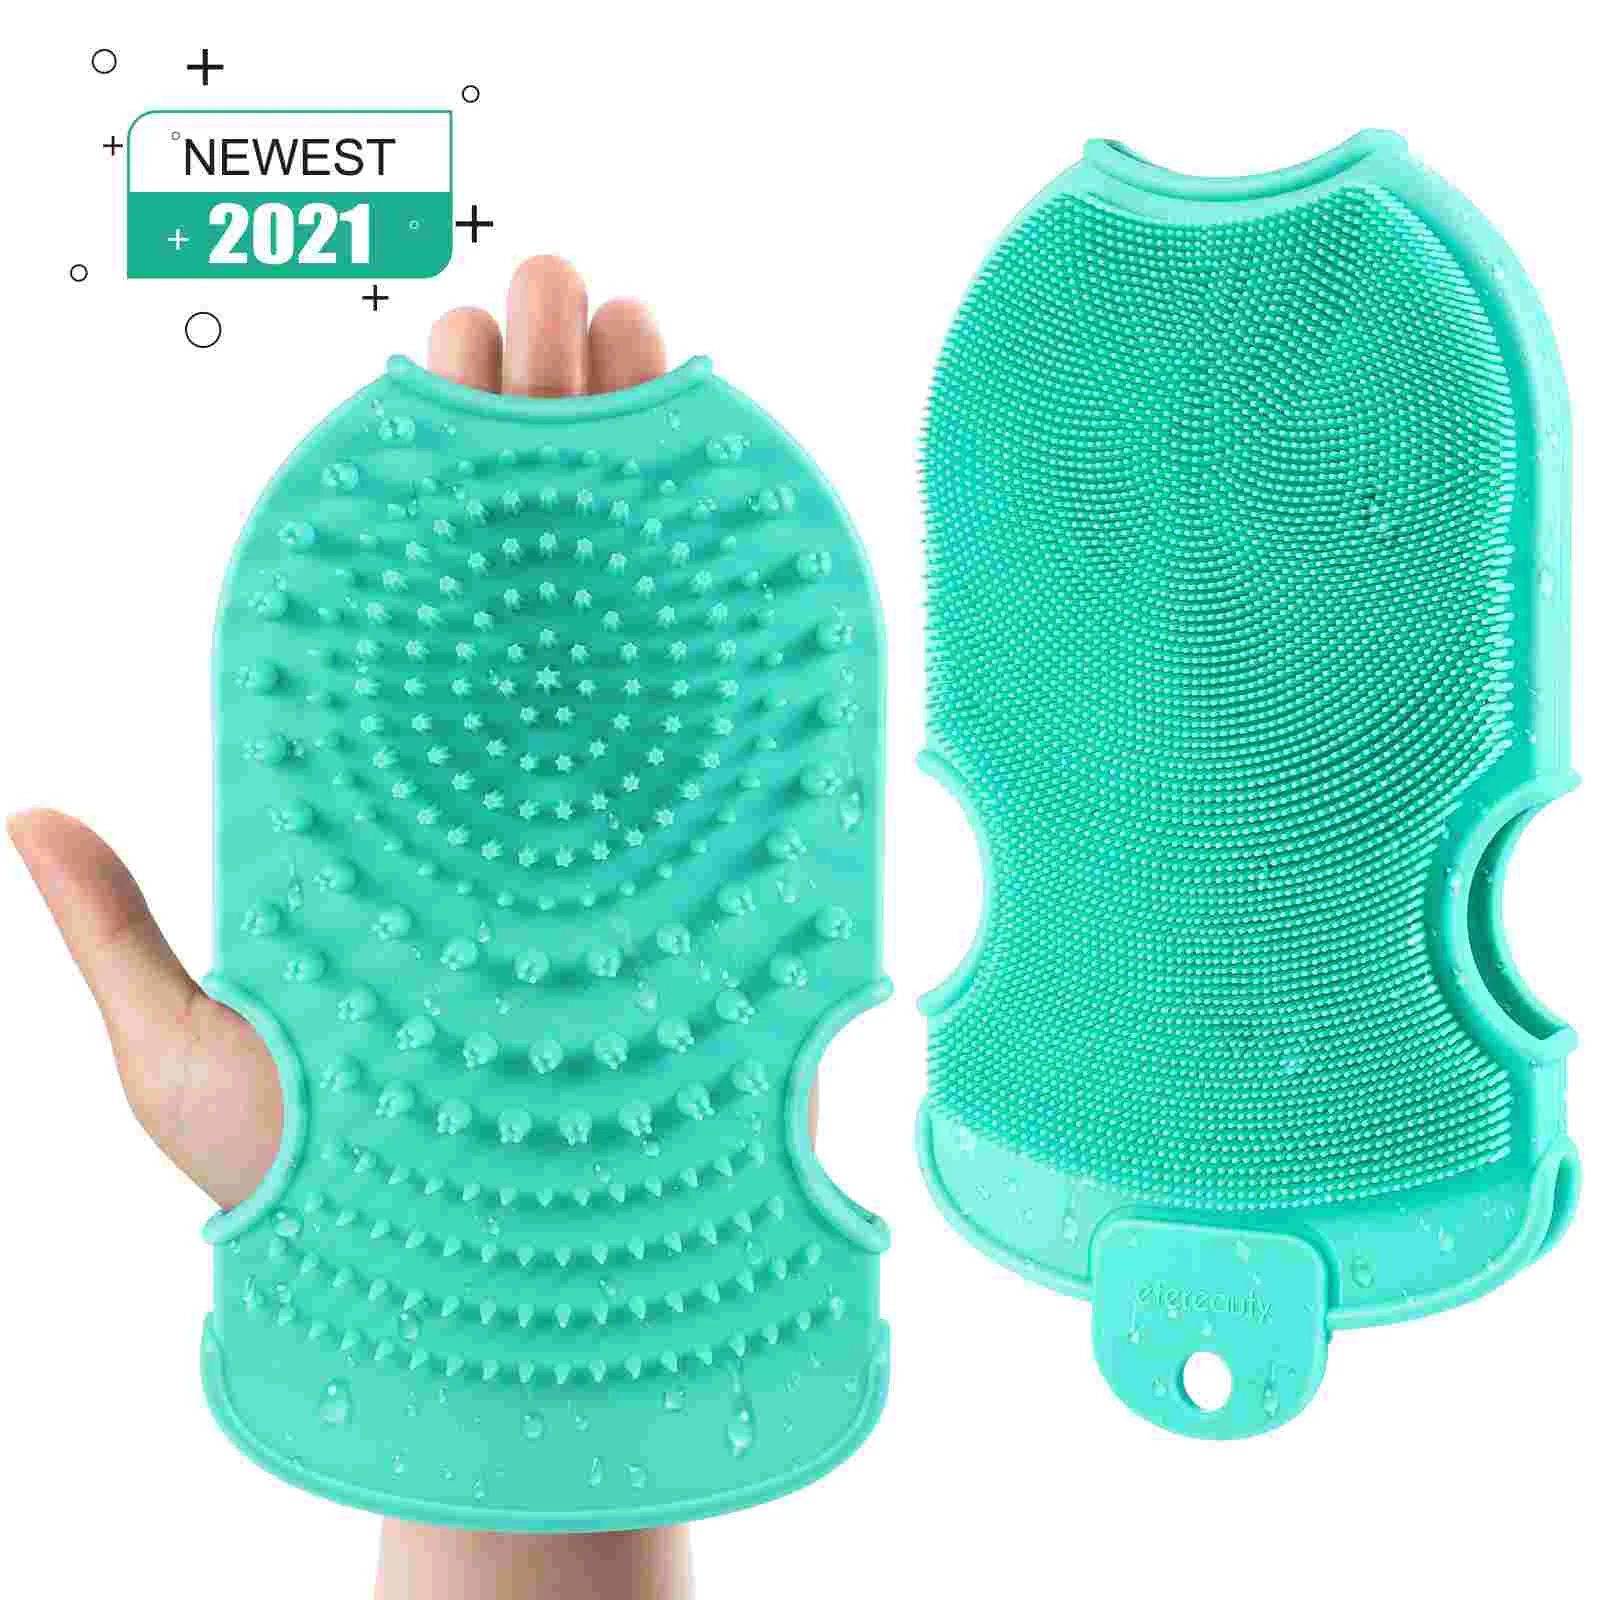 

ETEREAUTY Silicone Body Brush Double-sided Space Saving Dense Bristles Bath Scrubber for Exfoliating